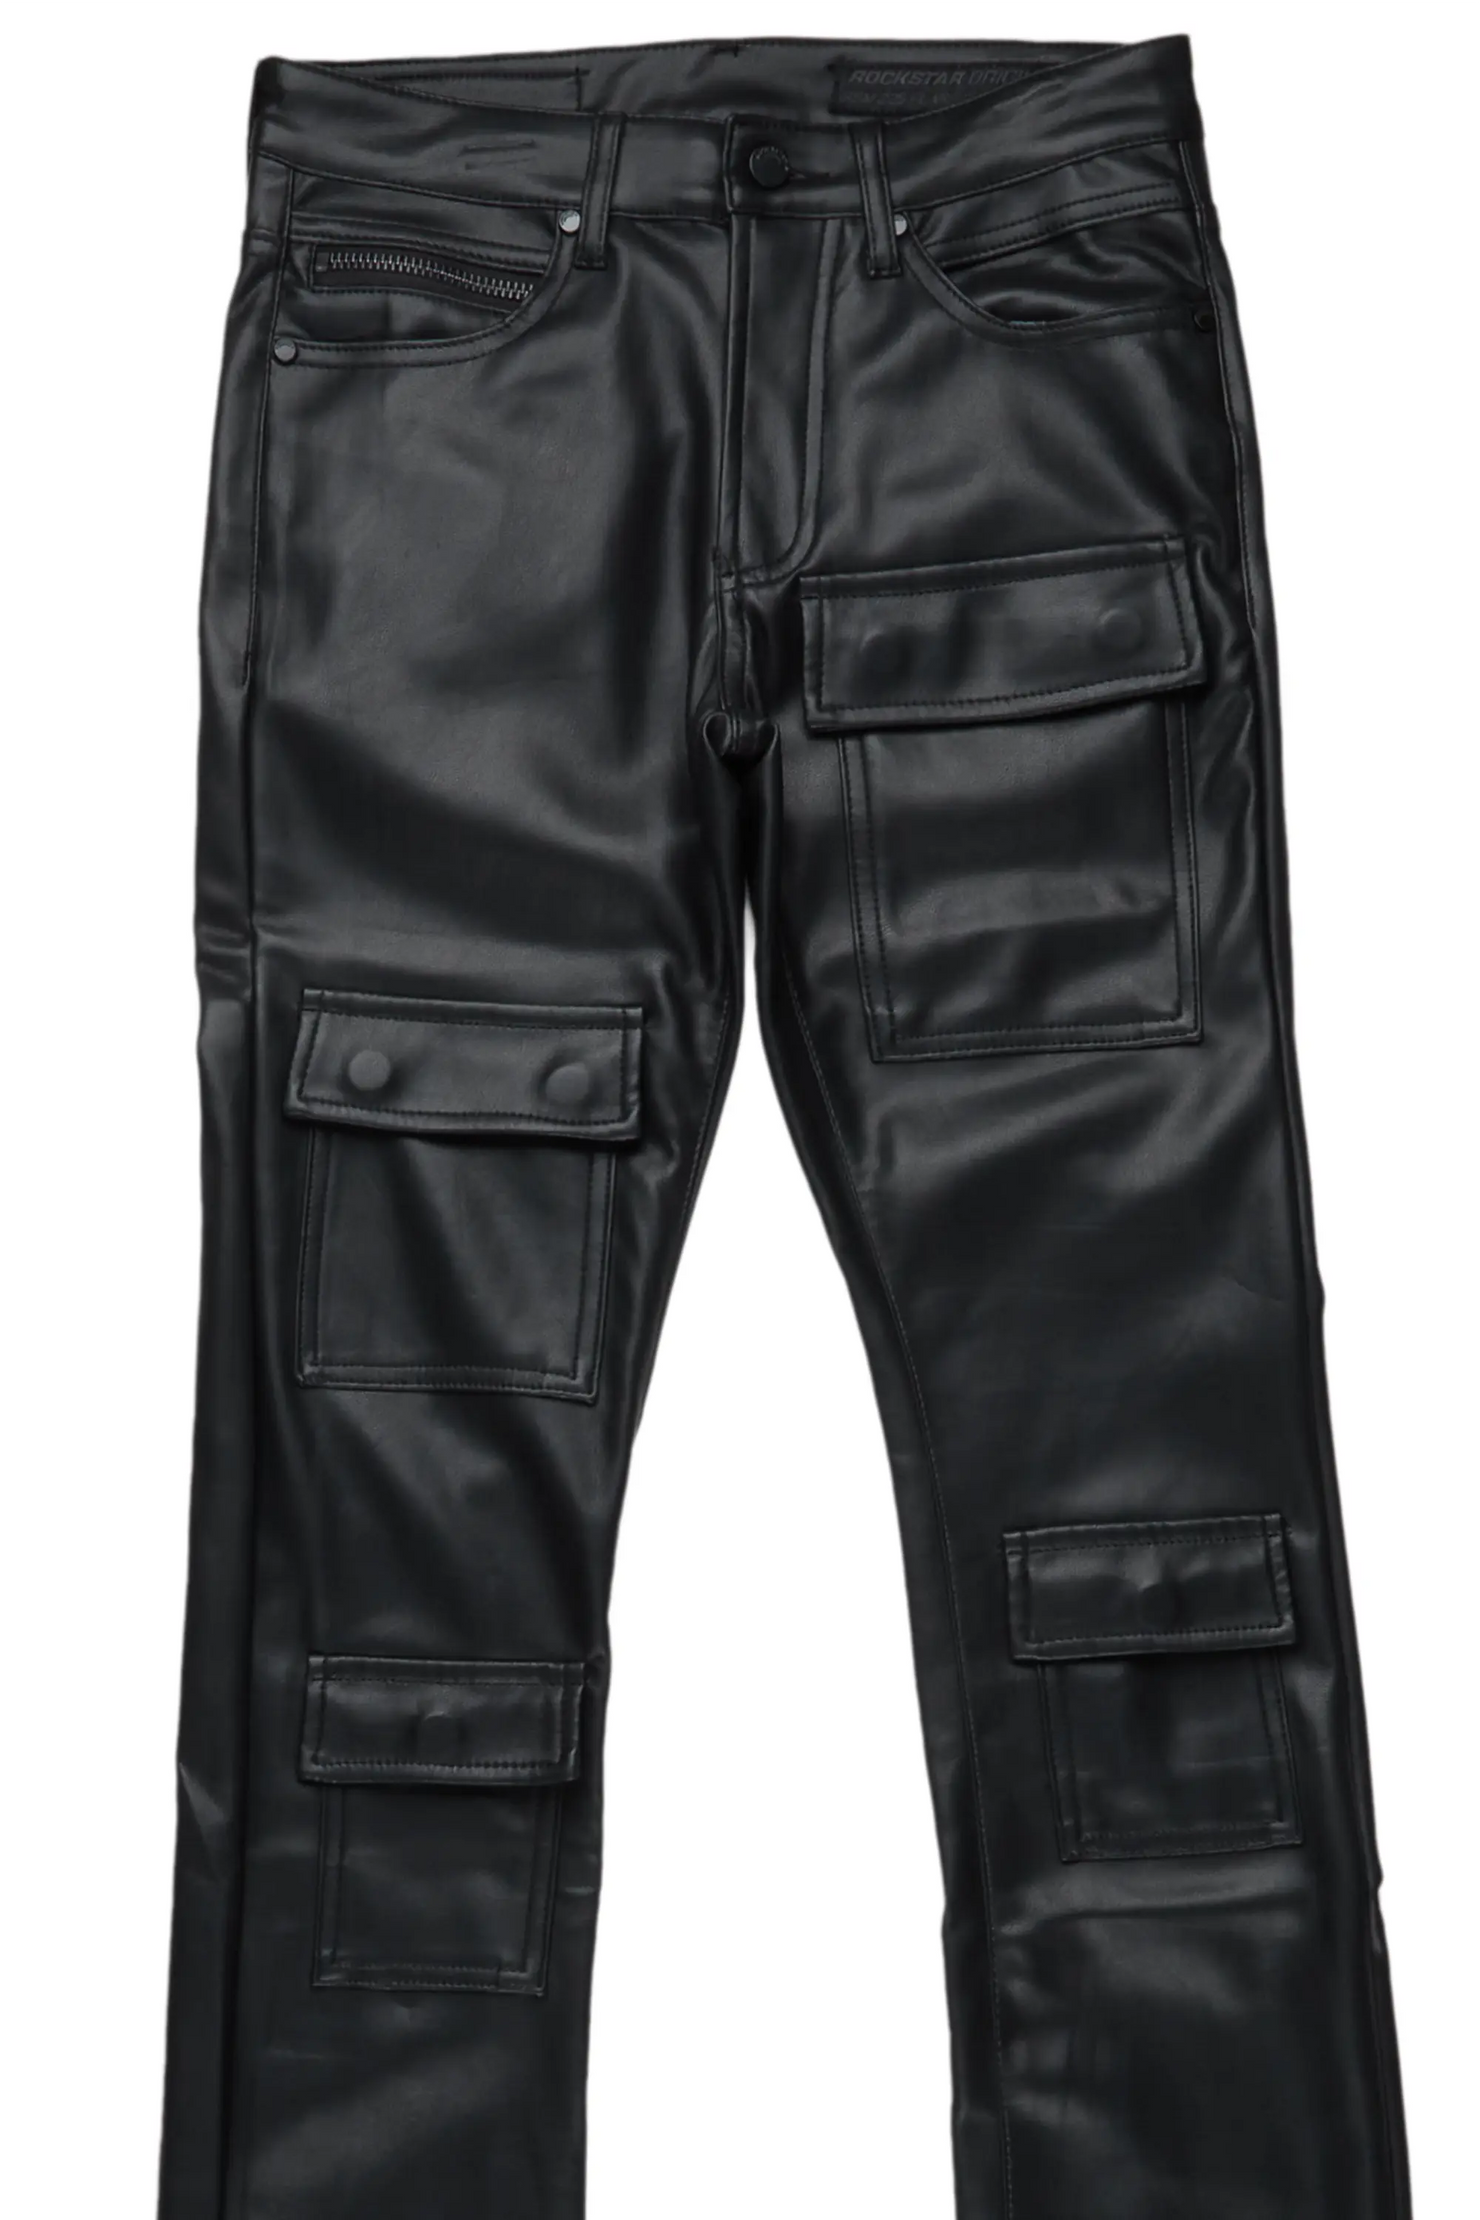 Petrus Black Faux Leather Super Stacked Flare Jean